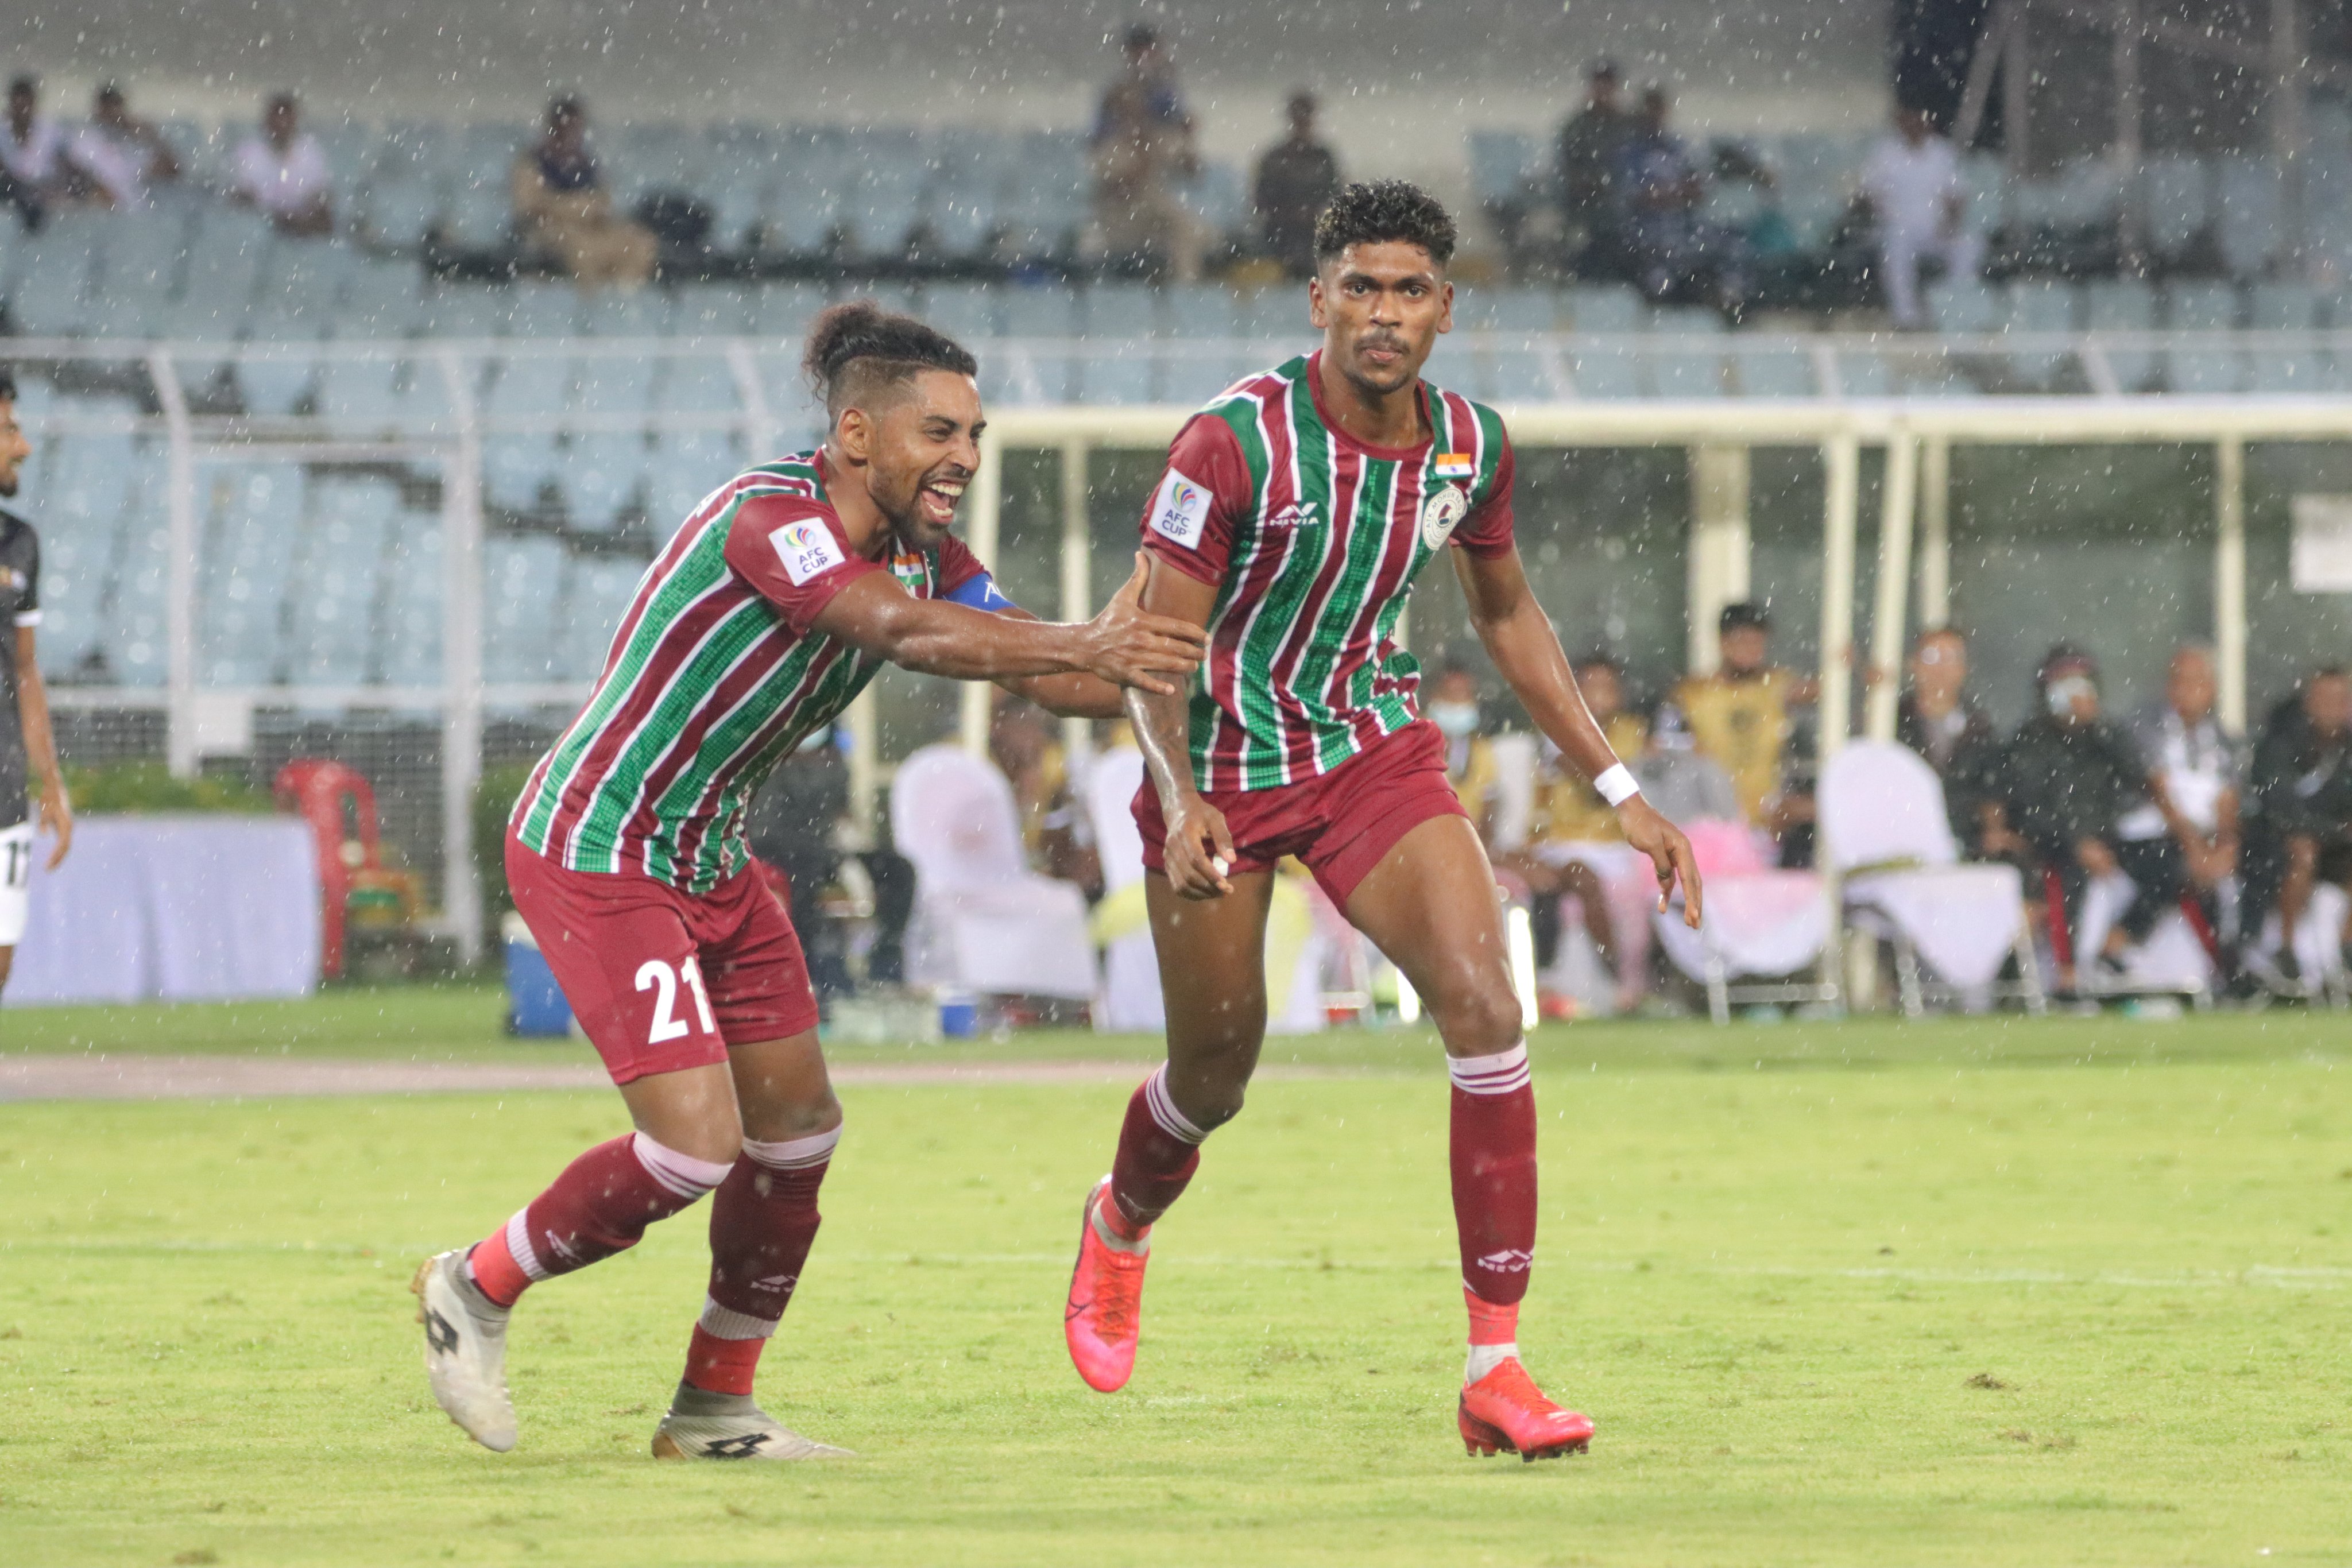 AFC Cup 2022: Liston Colaco scores a HAT-TRICK as ATK Mohun Bagan beat Bashundhara Kings 4-0 to secure all 3 points, Watch HIGHLIGHTS